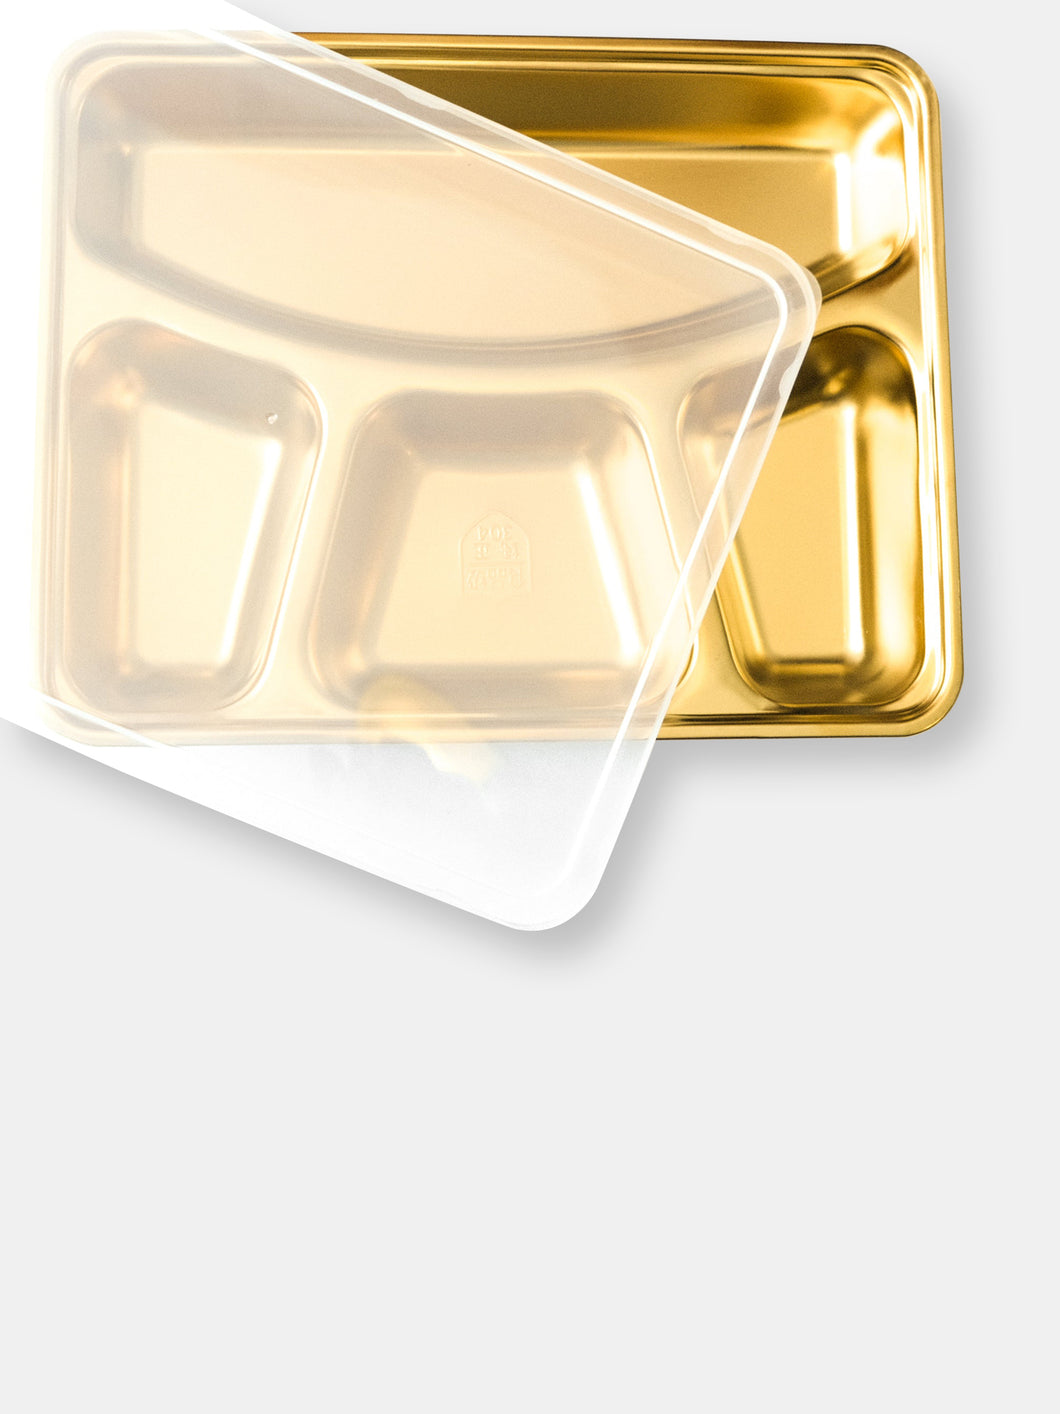 Gold Food Tray